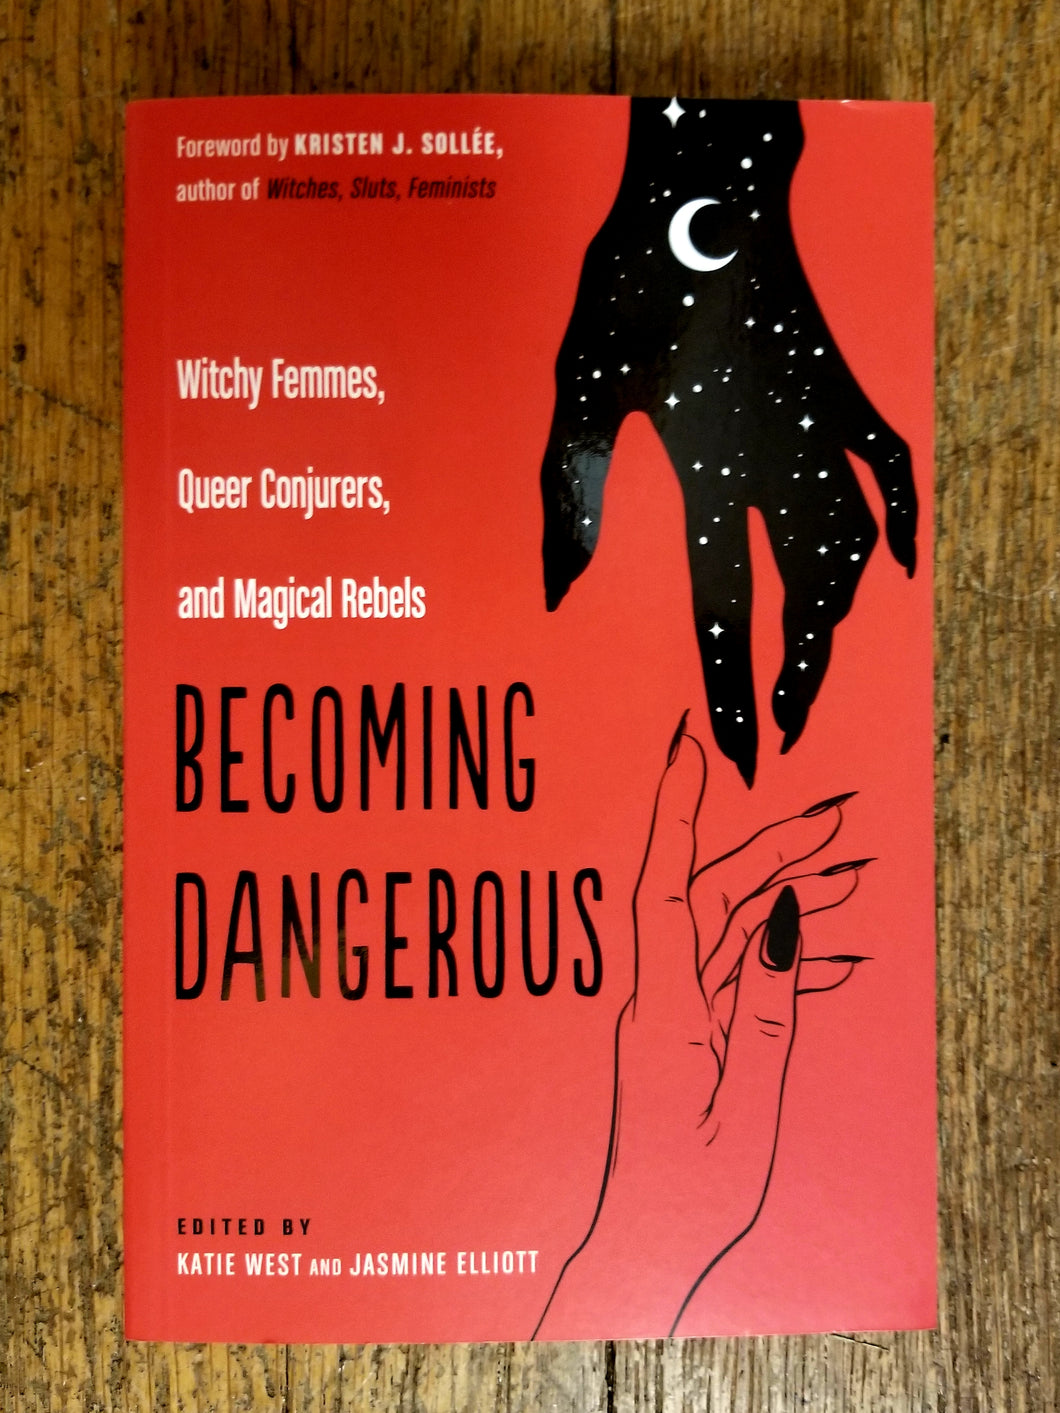 Becoming Dangerous: Witchy Femmes, Queer Conjurers, and Magical Rebels edited by Katie West & Jasmine Elliott